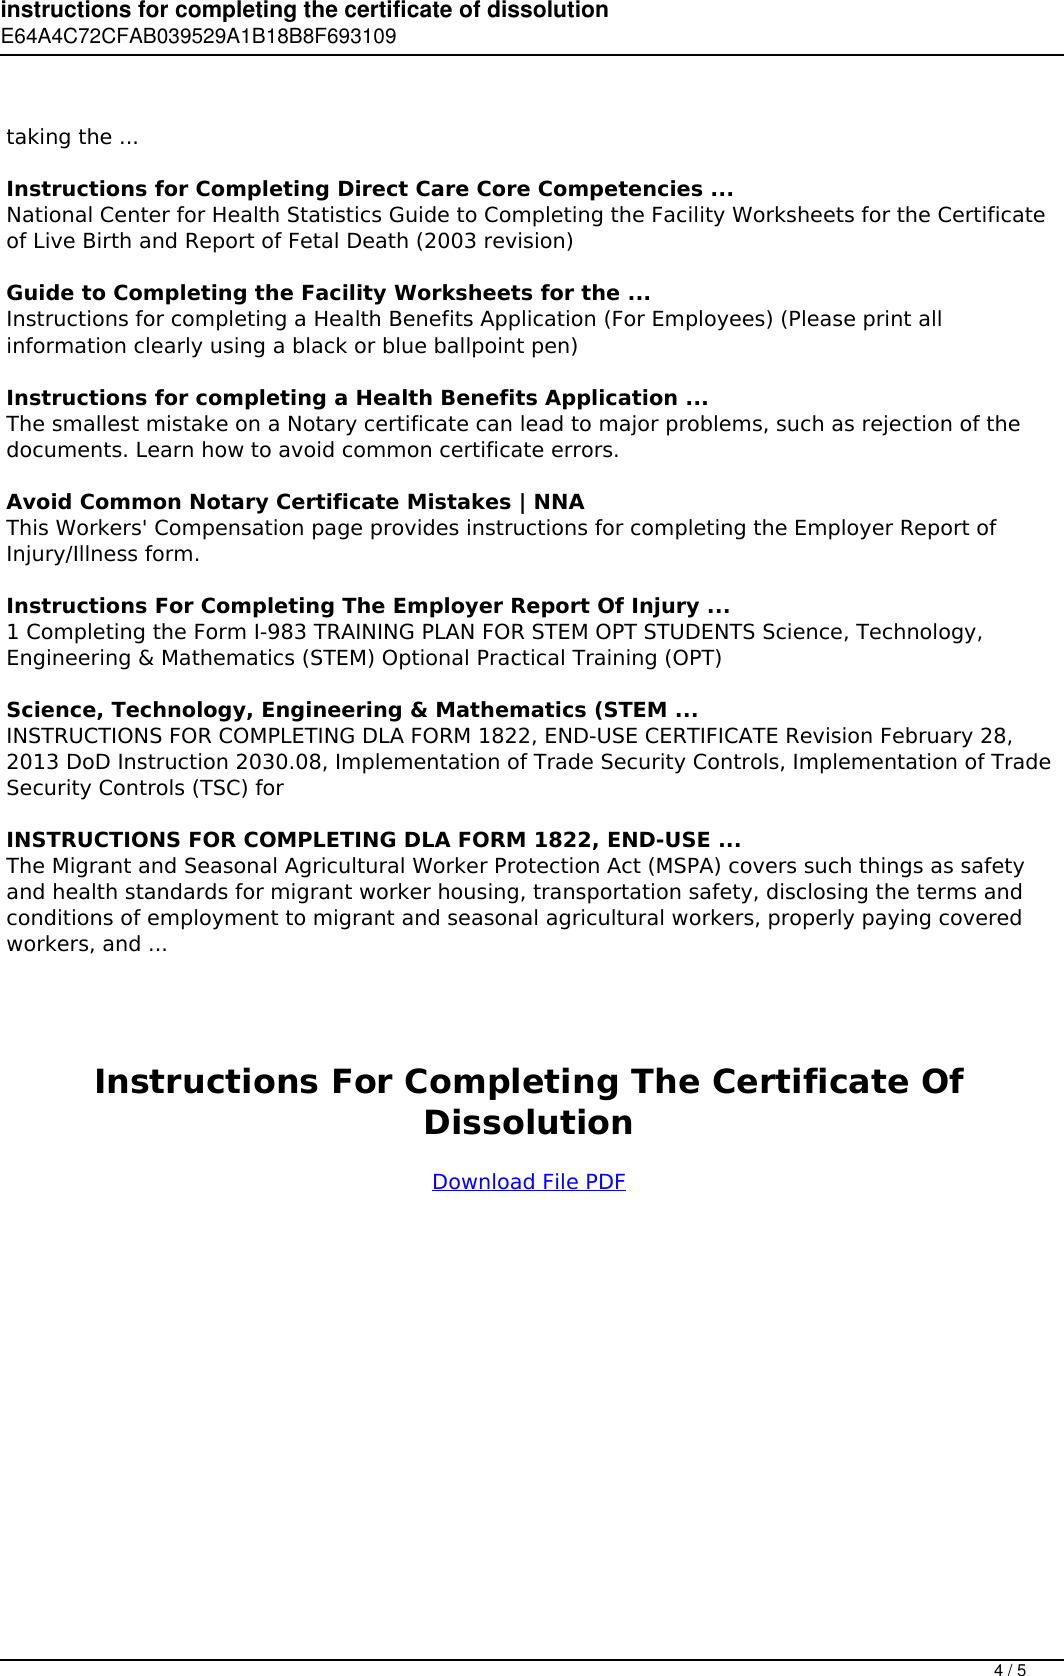 Page 4 of 5 - Instructions For Completing The Certificate Of Dissolution